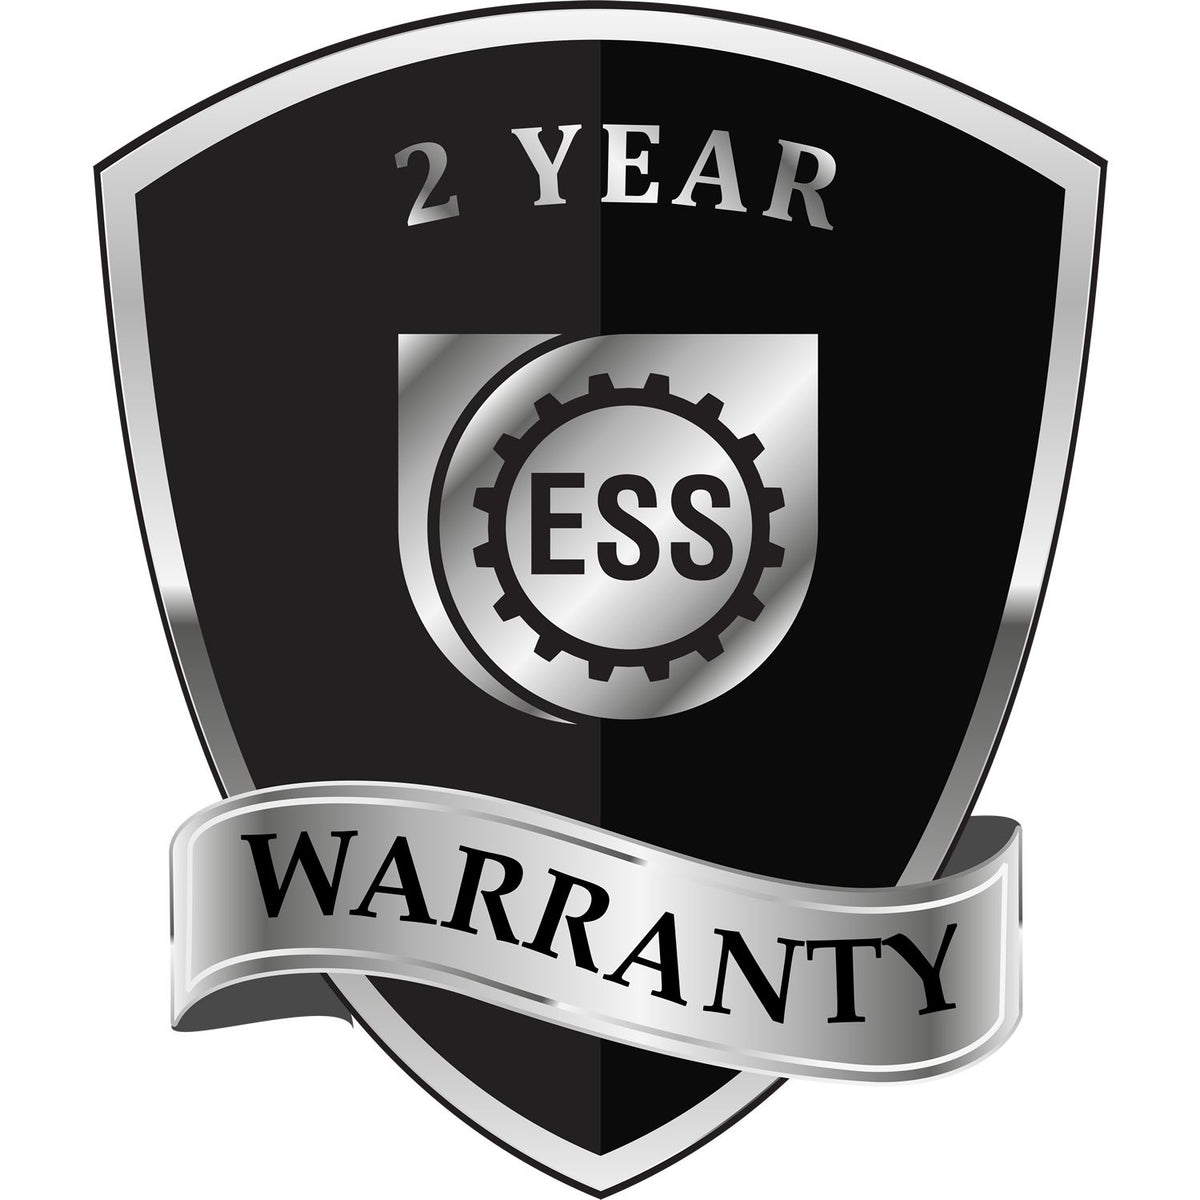 A black and silver badge or emblem showing warranty information for the Vermont Geologist Desk Seal